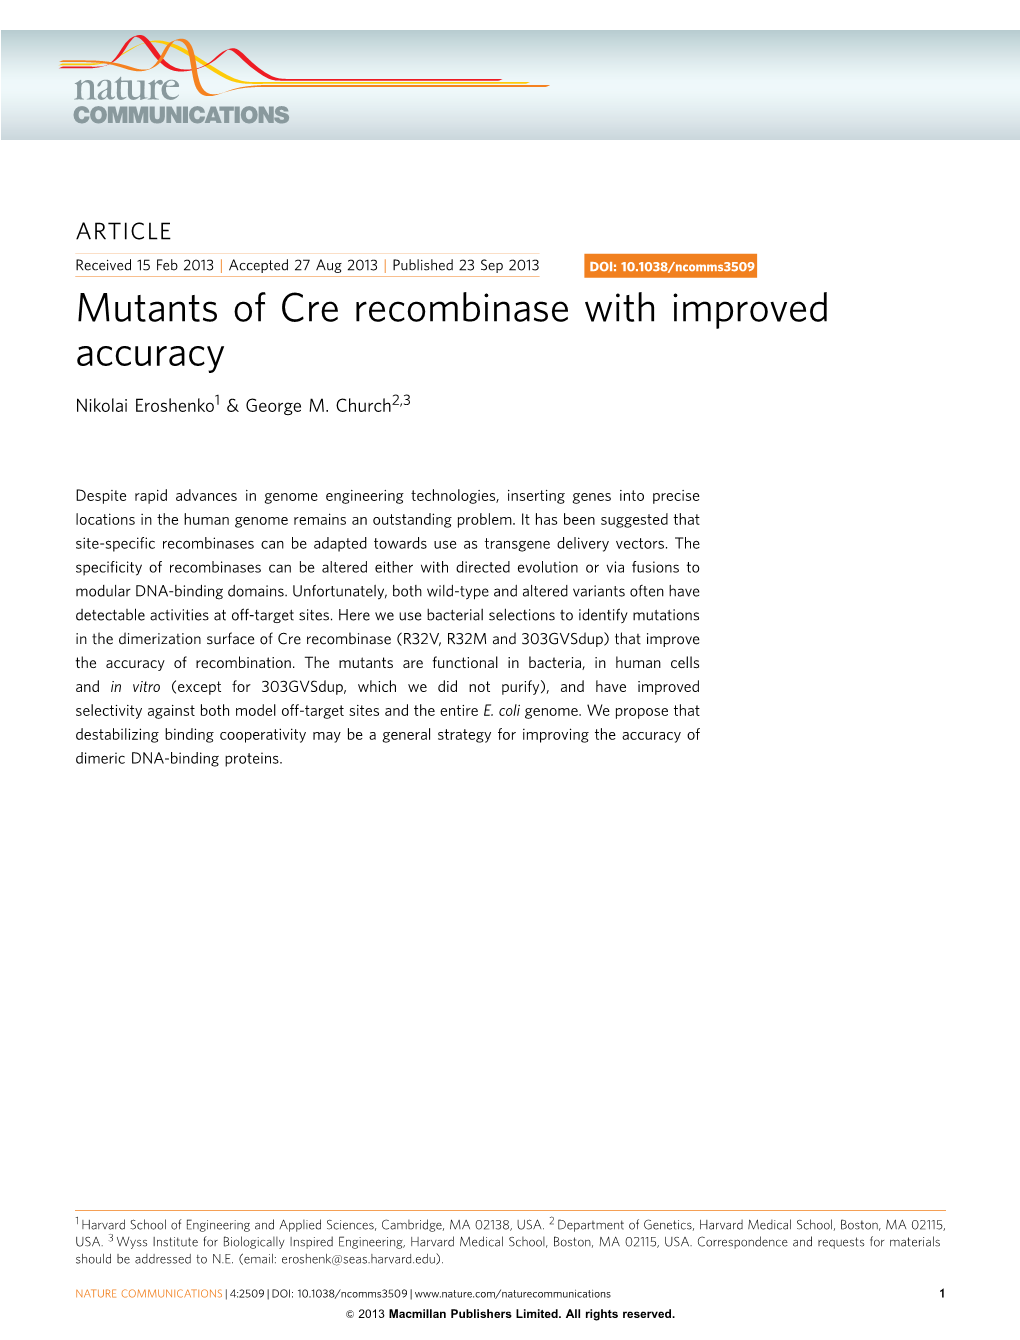 Mutants of Cre Recombinase with Improved Accuracy